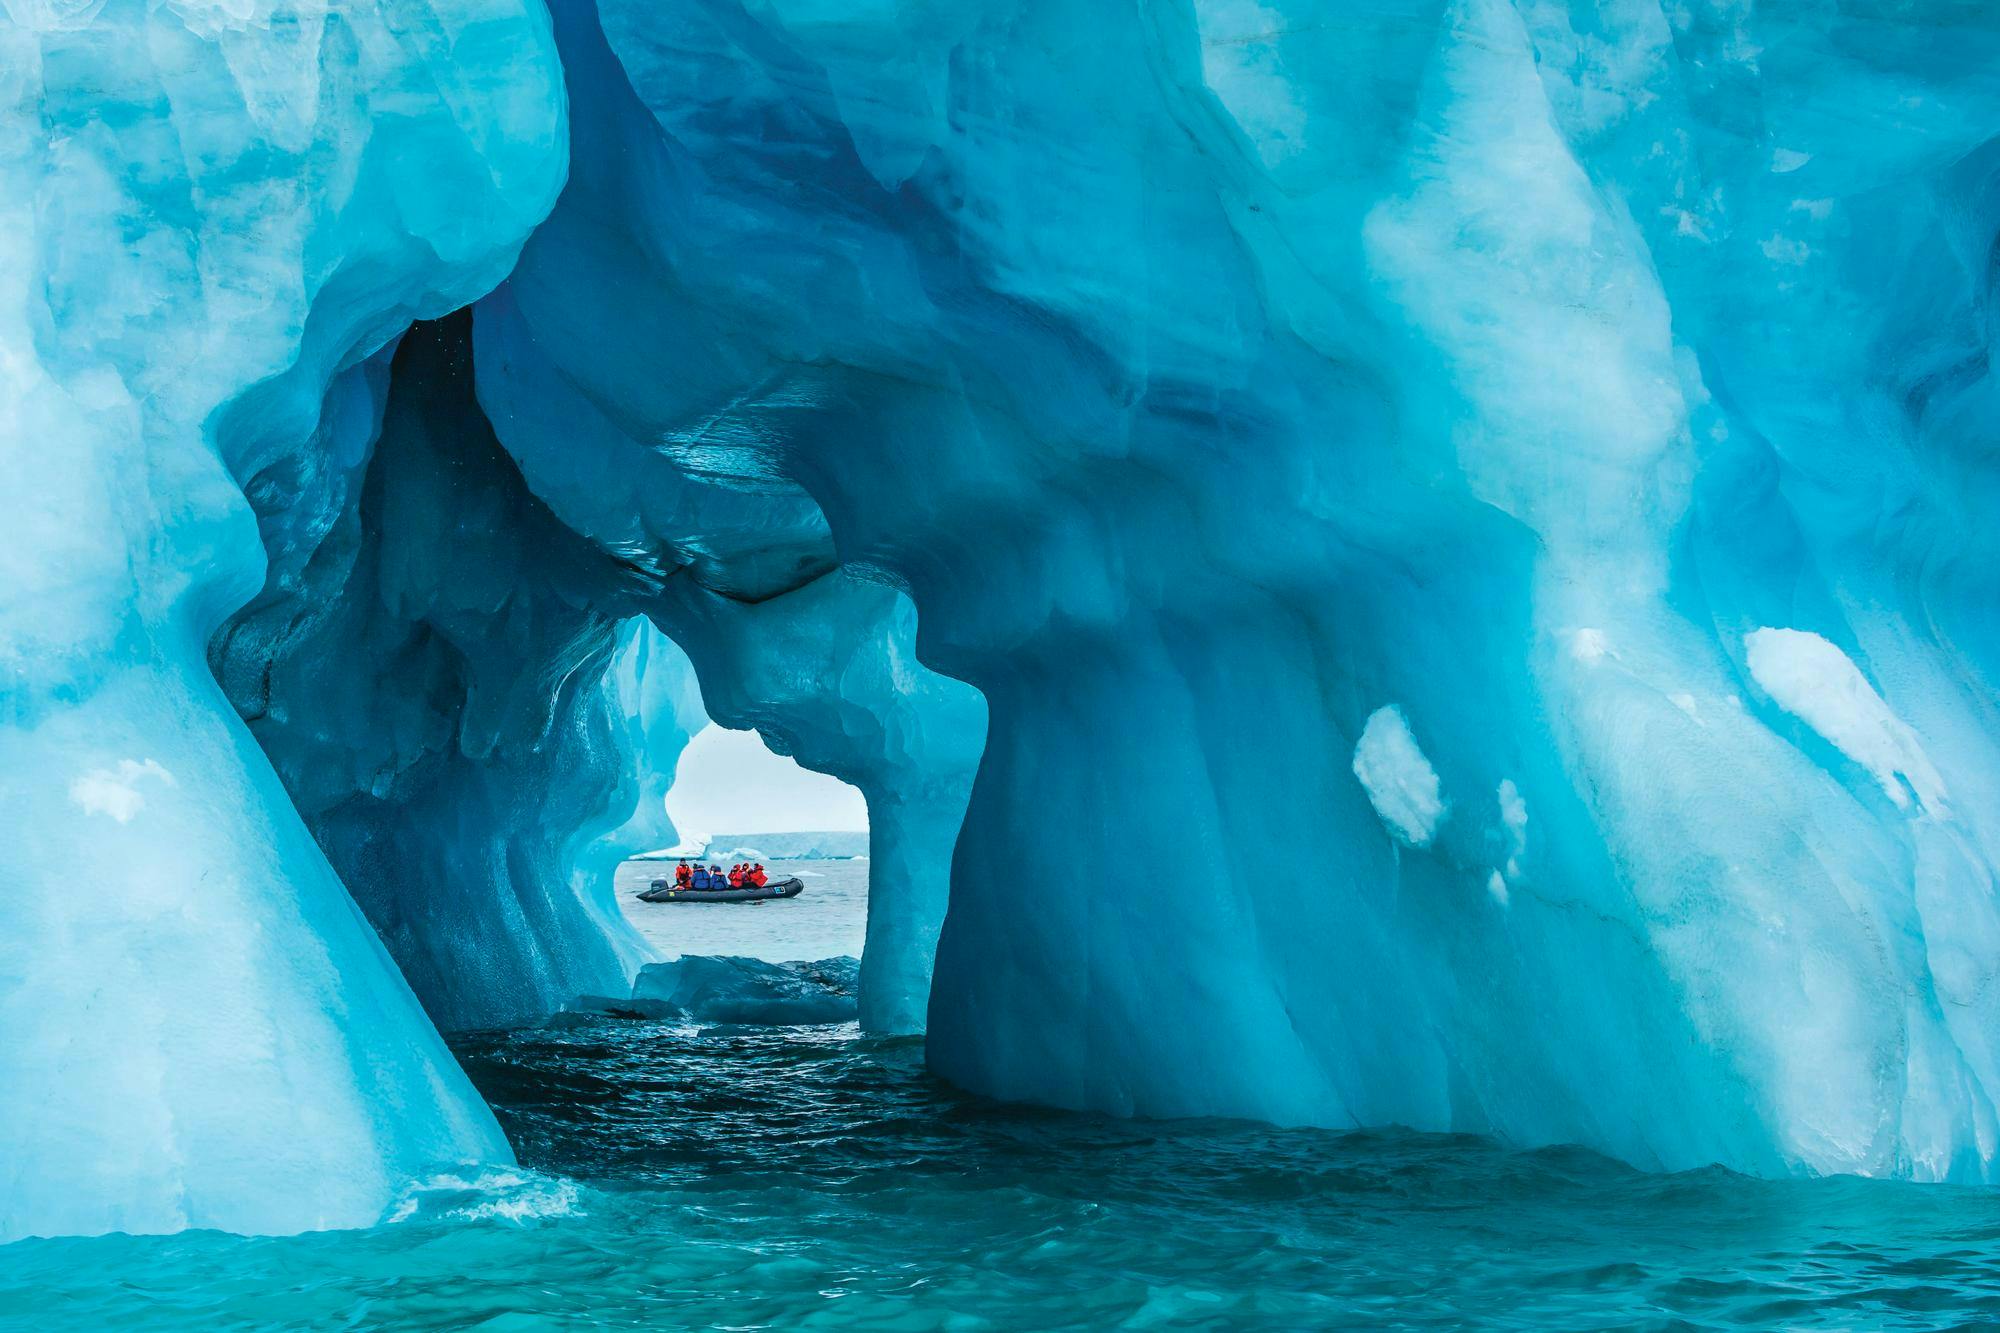 Guests explore a sea ice cave by zodiac in Queens Bay, Philpots Island, Lancanster Sound, Canada, Northwest Passage